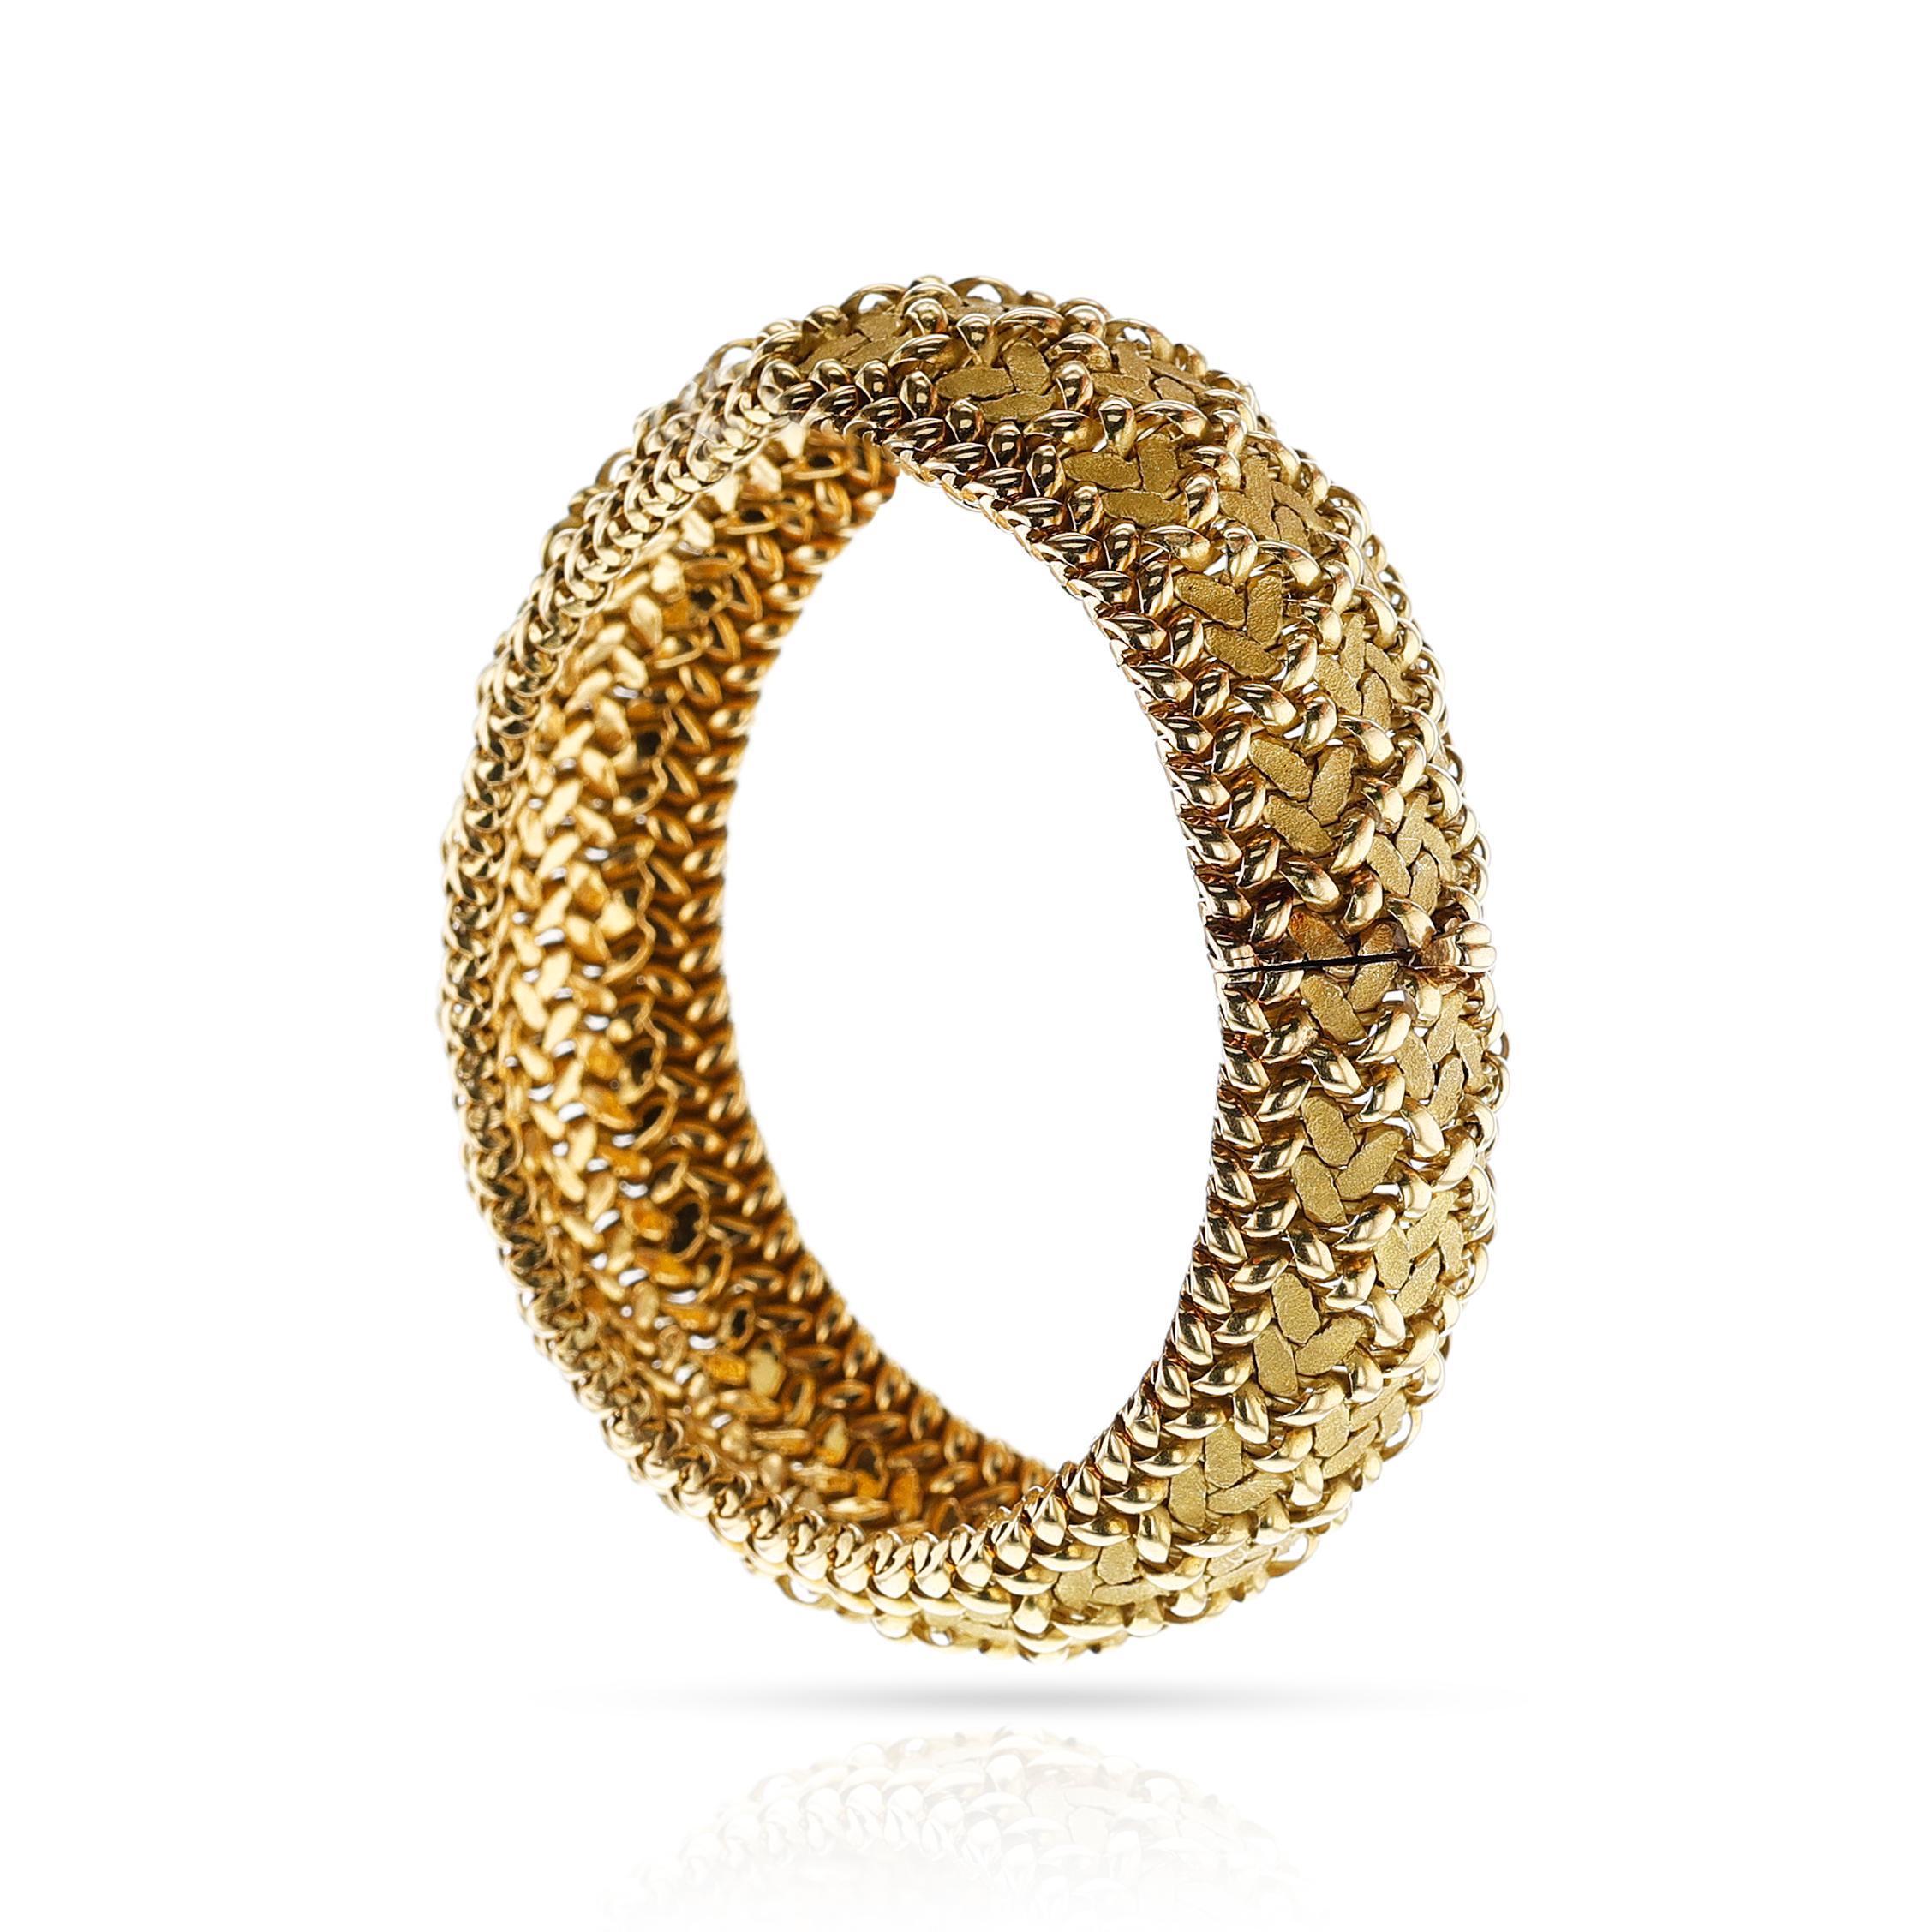 Georges L'enfant for Regner Paris Circa 1970s Gold Woven Bracelet, 18k In Excellent Condition For Sale In New York, NY